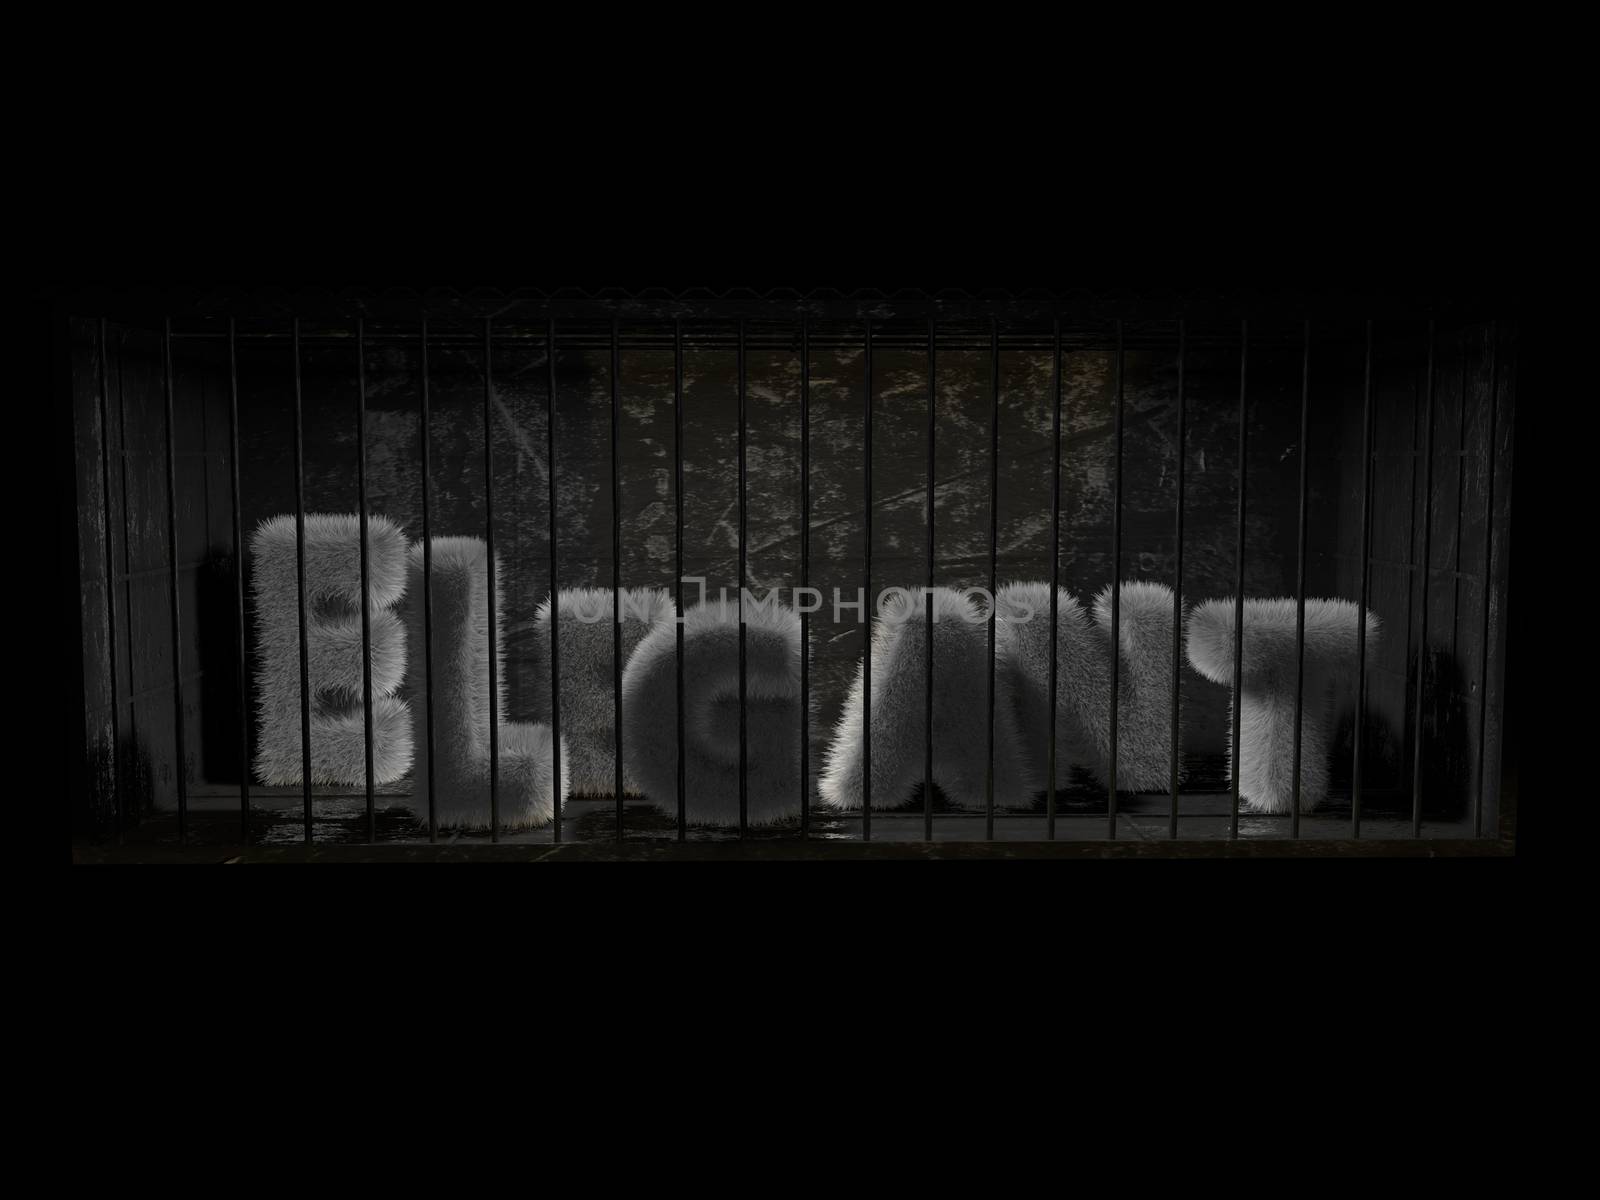 A fluffy word (elegant) with white hair behind bars with black background.